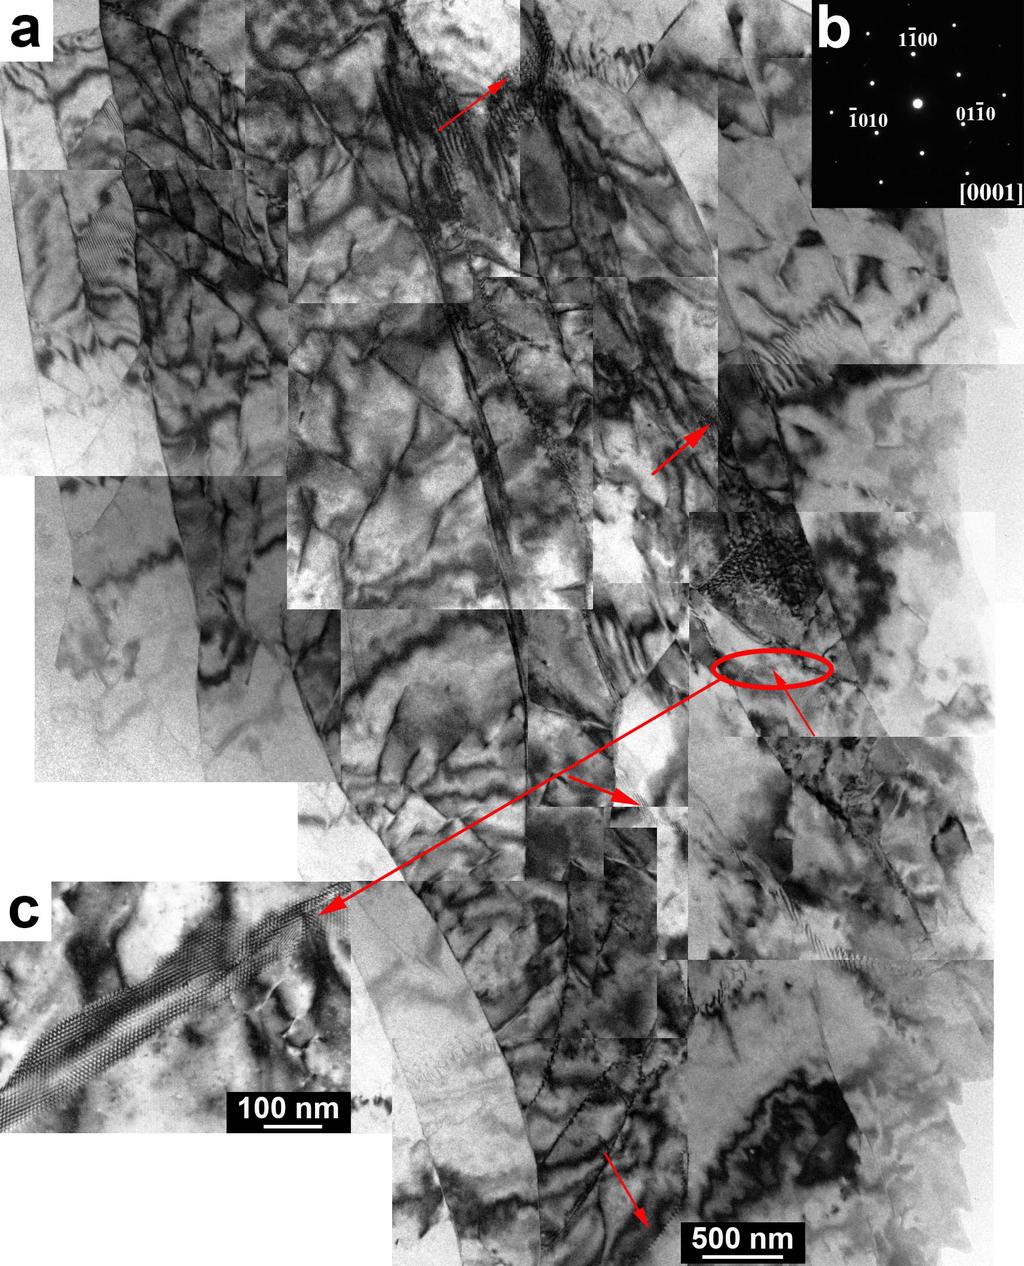 Figure S1. TEM images showing the distribution of hexagonal patterns in one grain viewed along the [0001], as indicated from the diffraction pattern in b.